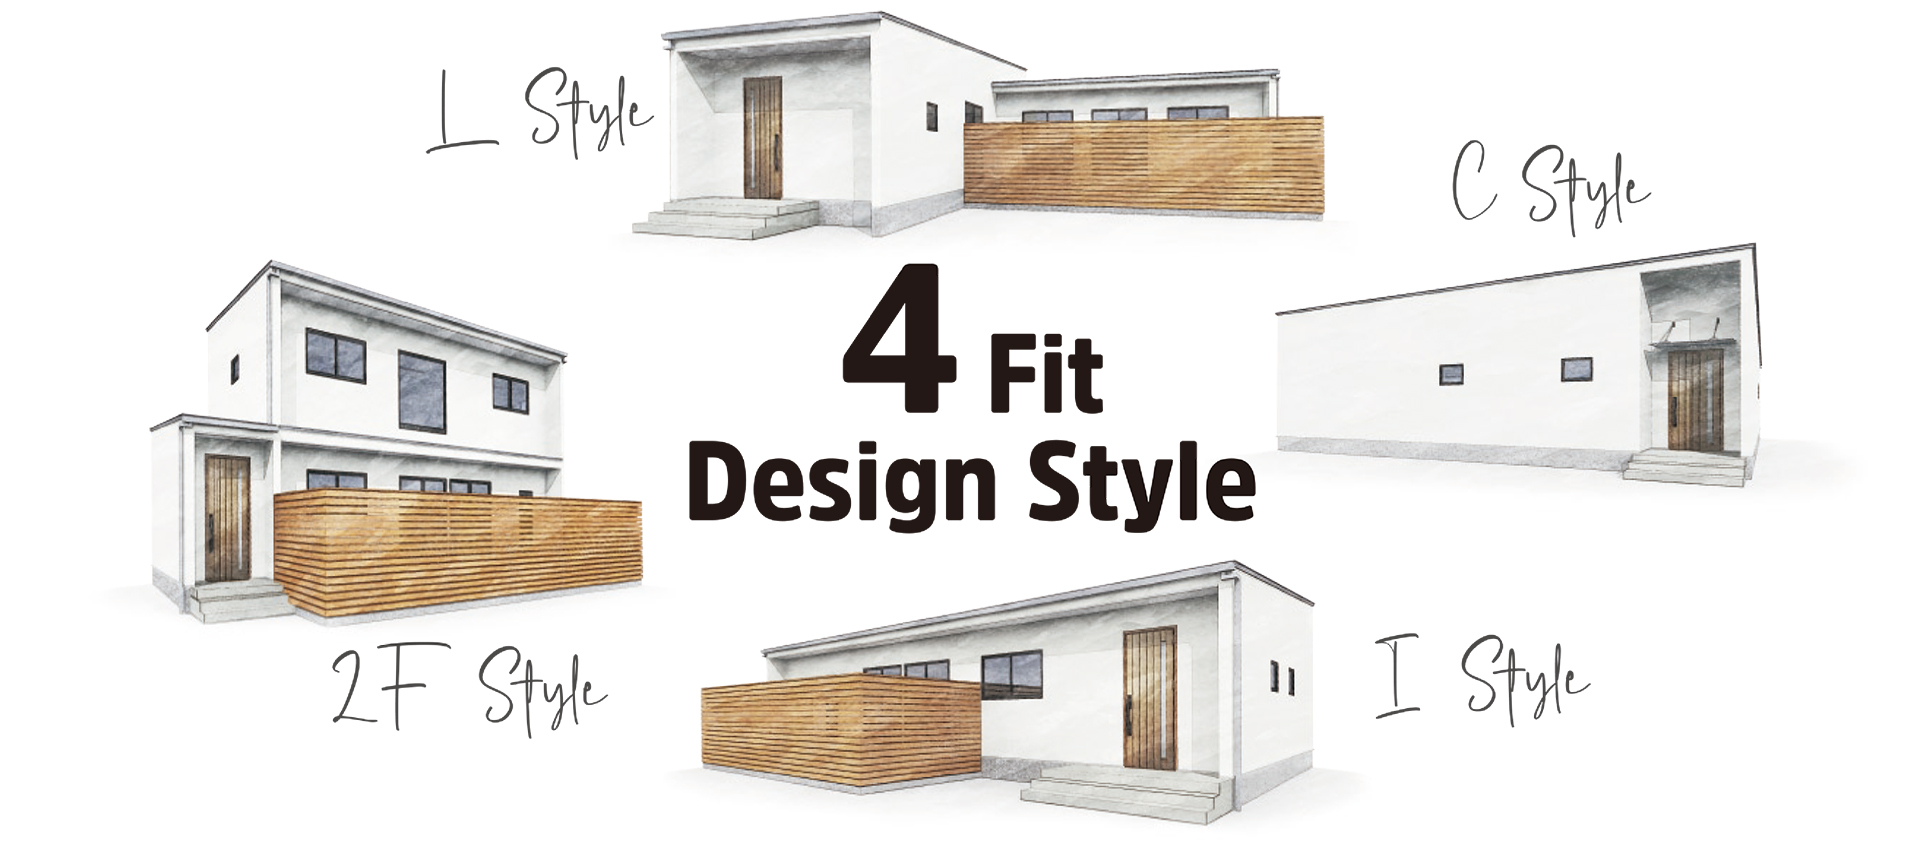 4Fit Design Style